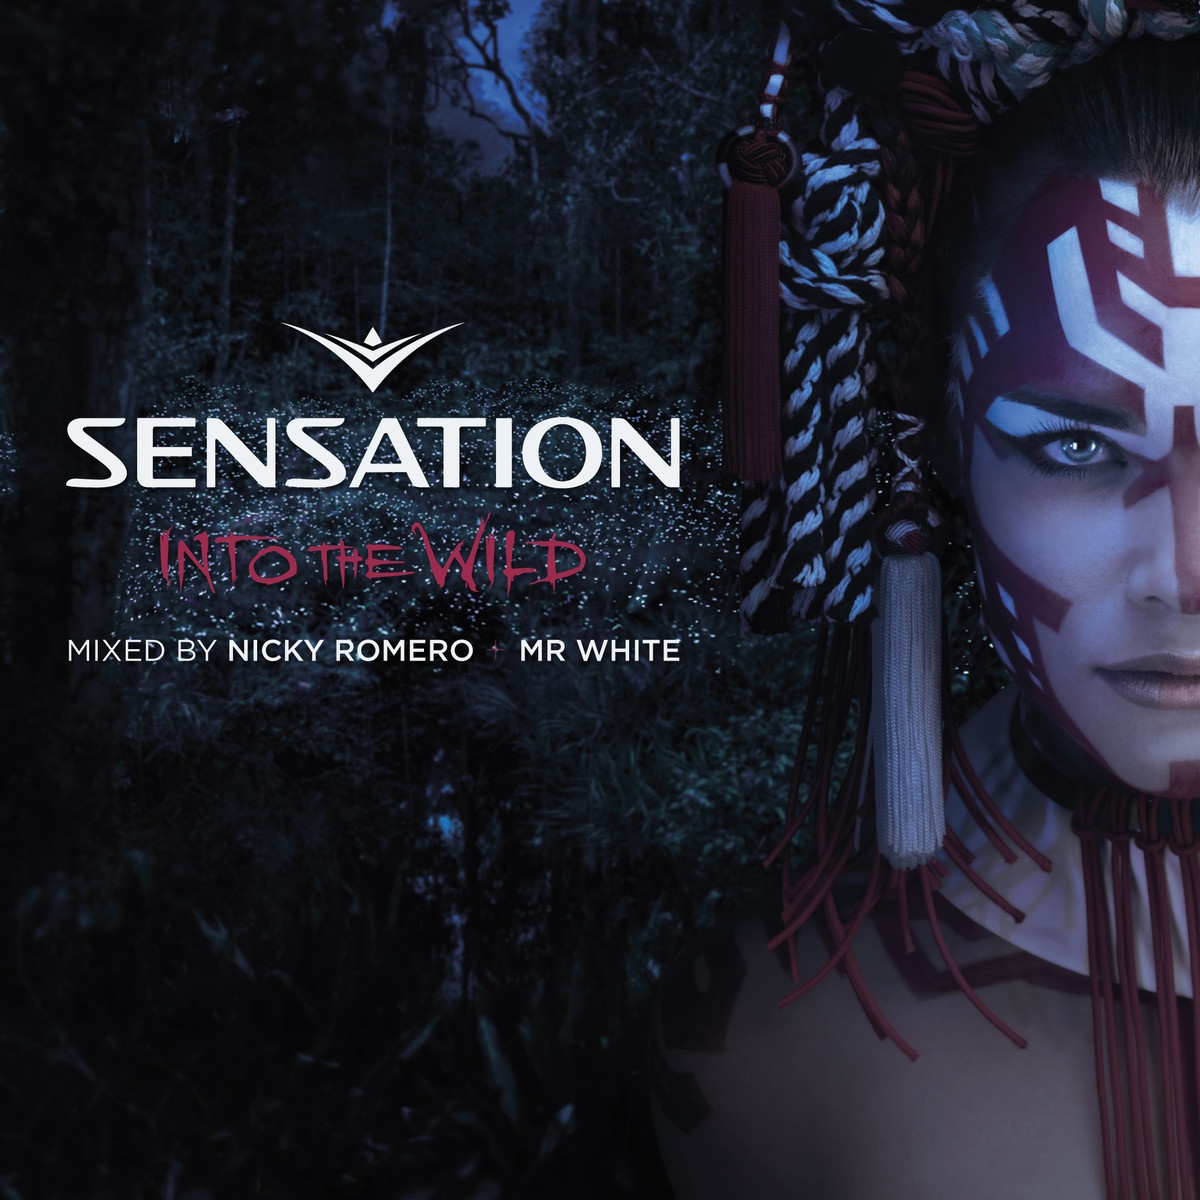 Sensation IntoThe Wild (continuous mix By Nicky Romero)